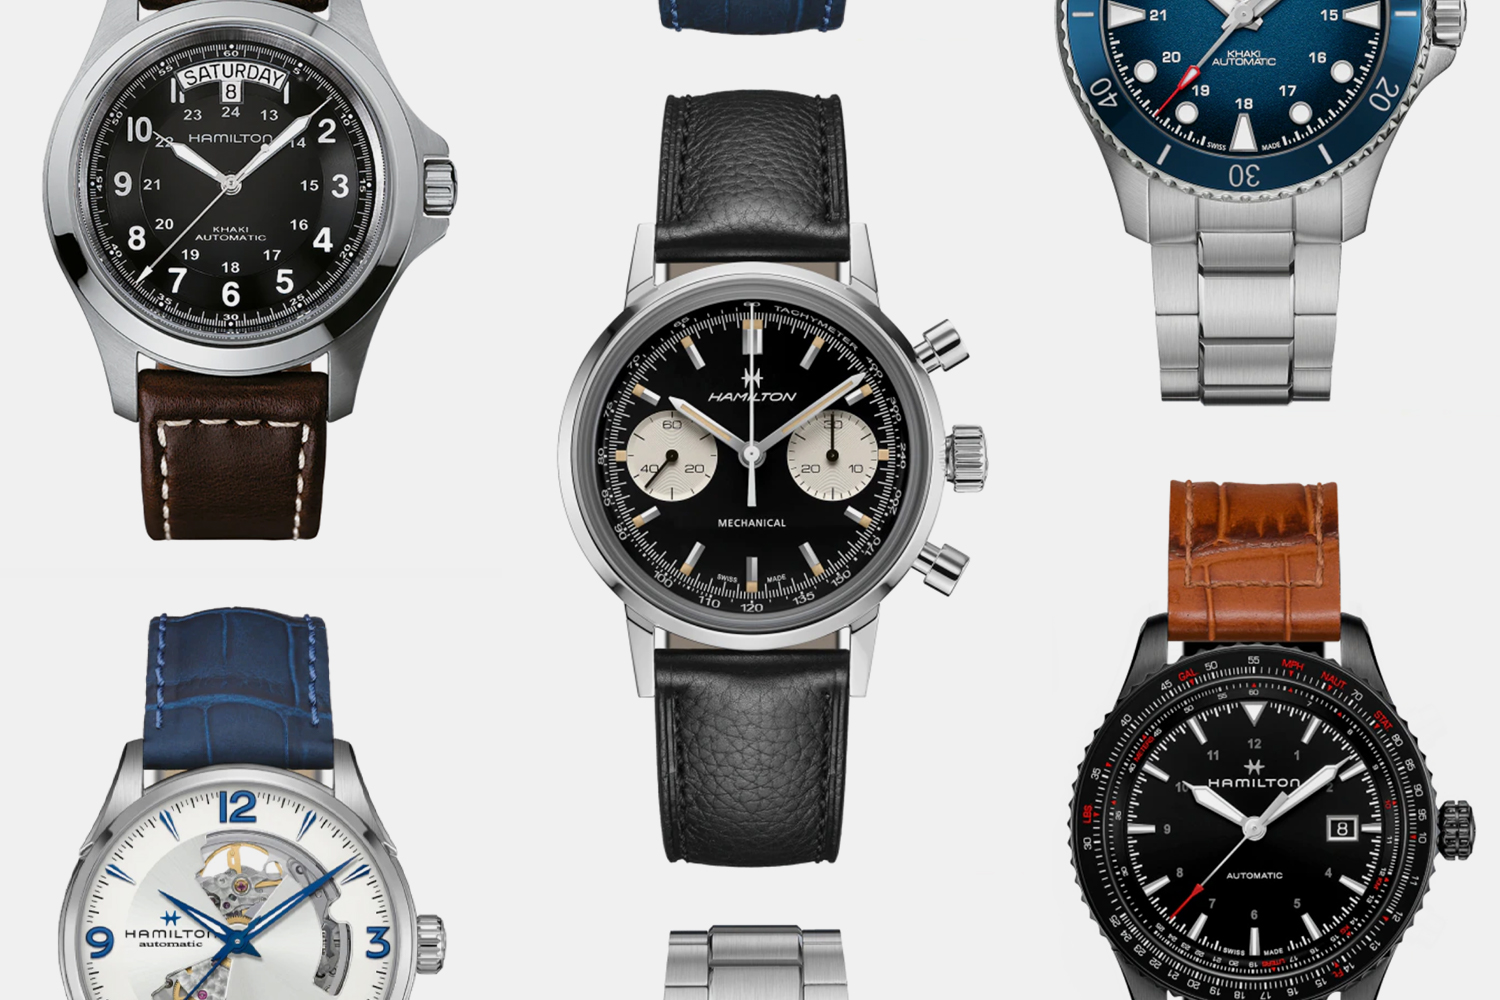 The Ultimate Father’s Day Gift? A Watch That’ll Last Forever - InsideHook